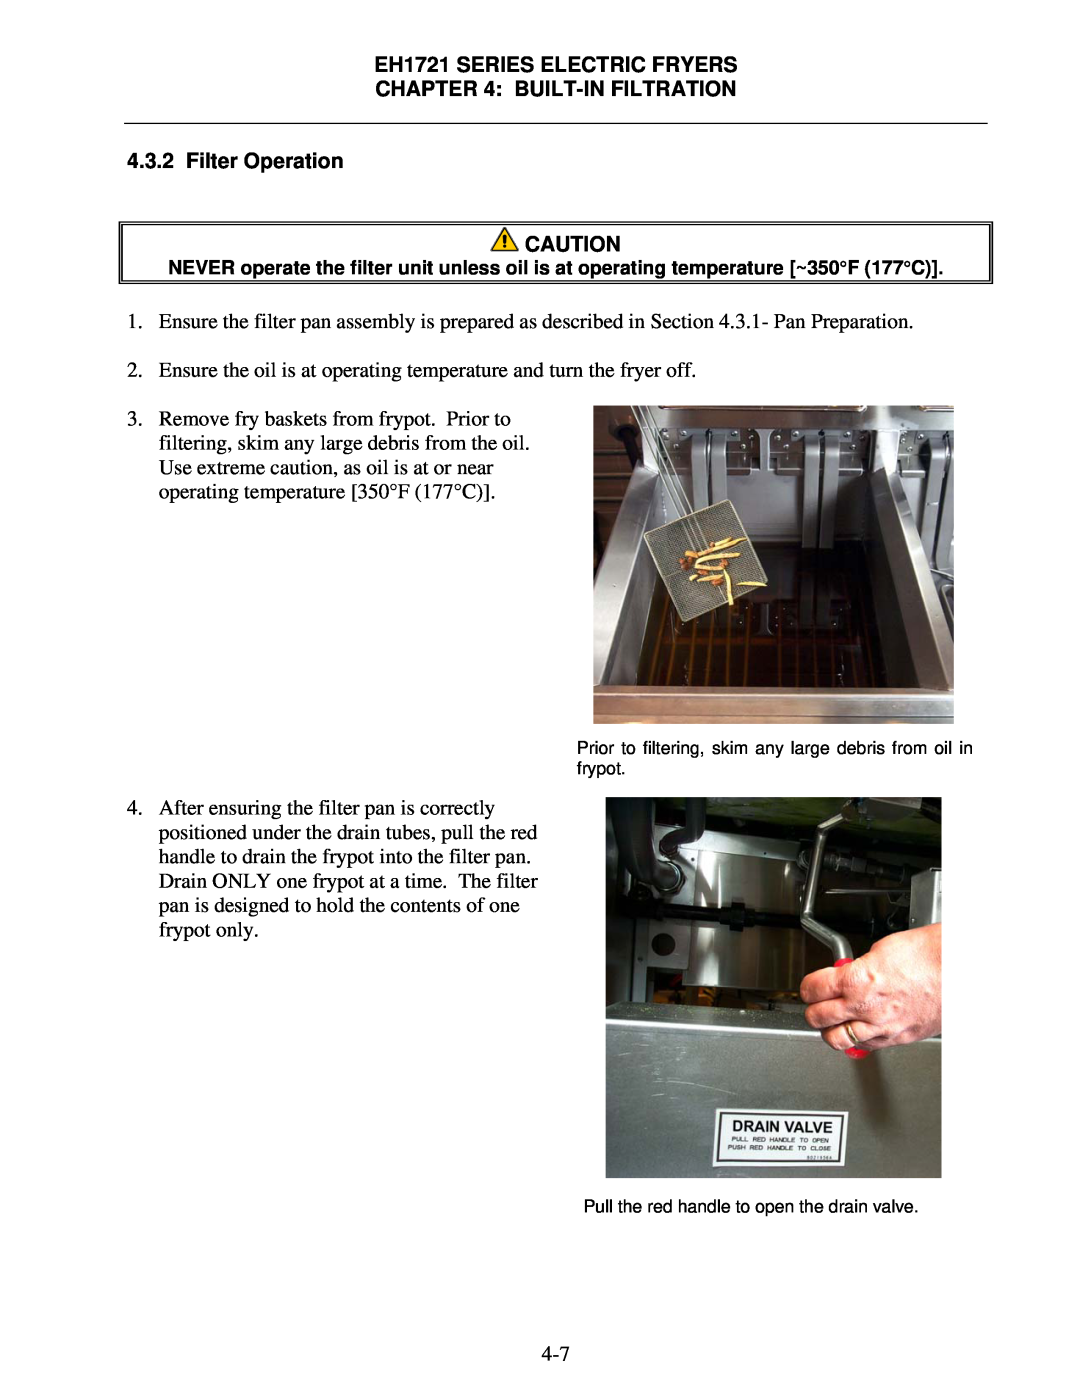 Frymaster operation manual EH1721 SERIES ELECTRIC FRYERS, Built-Infiltration, Filter Operation 